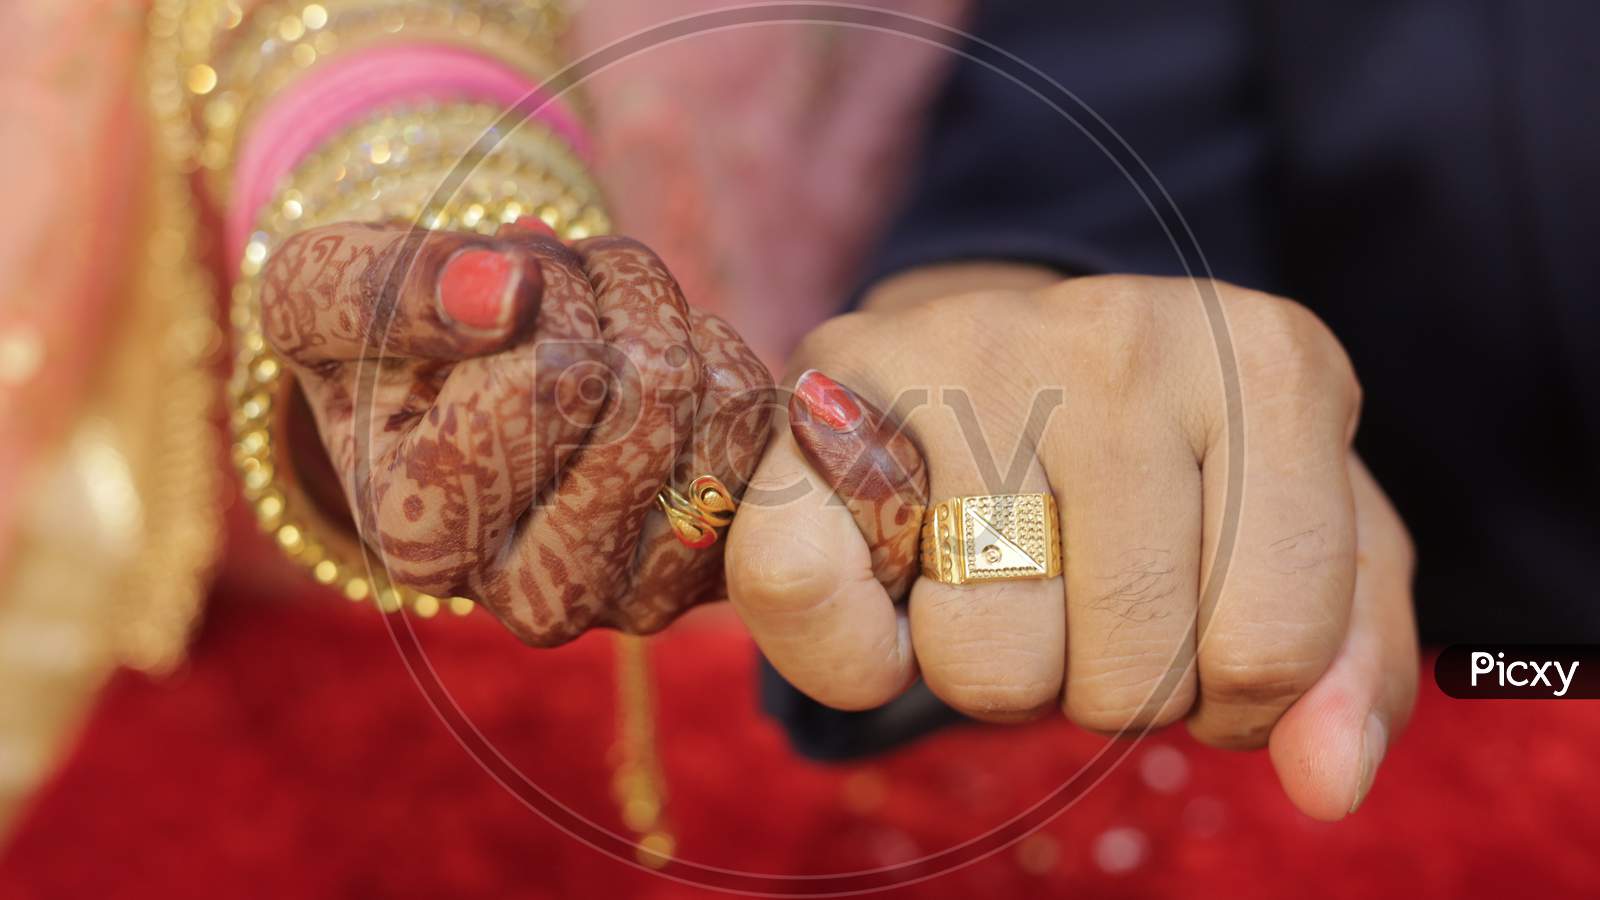 Ring ceremony trolley | Ring Engagement Ceremony | Ring Entry | Sagai ring  entry » 9990833757